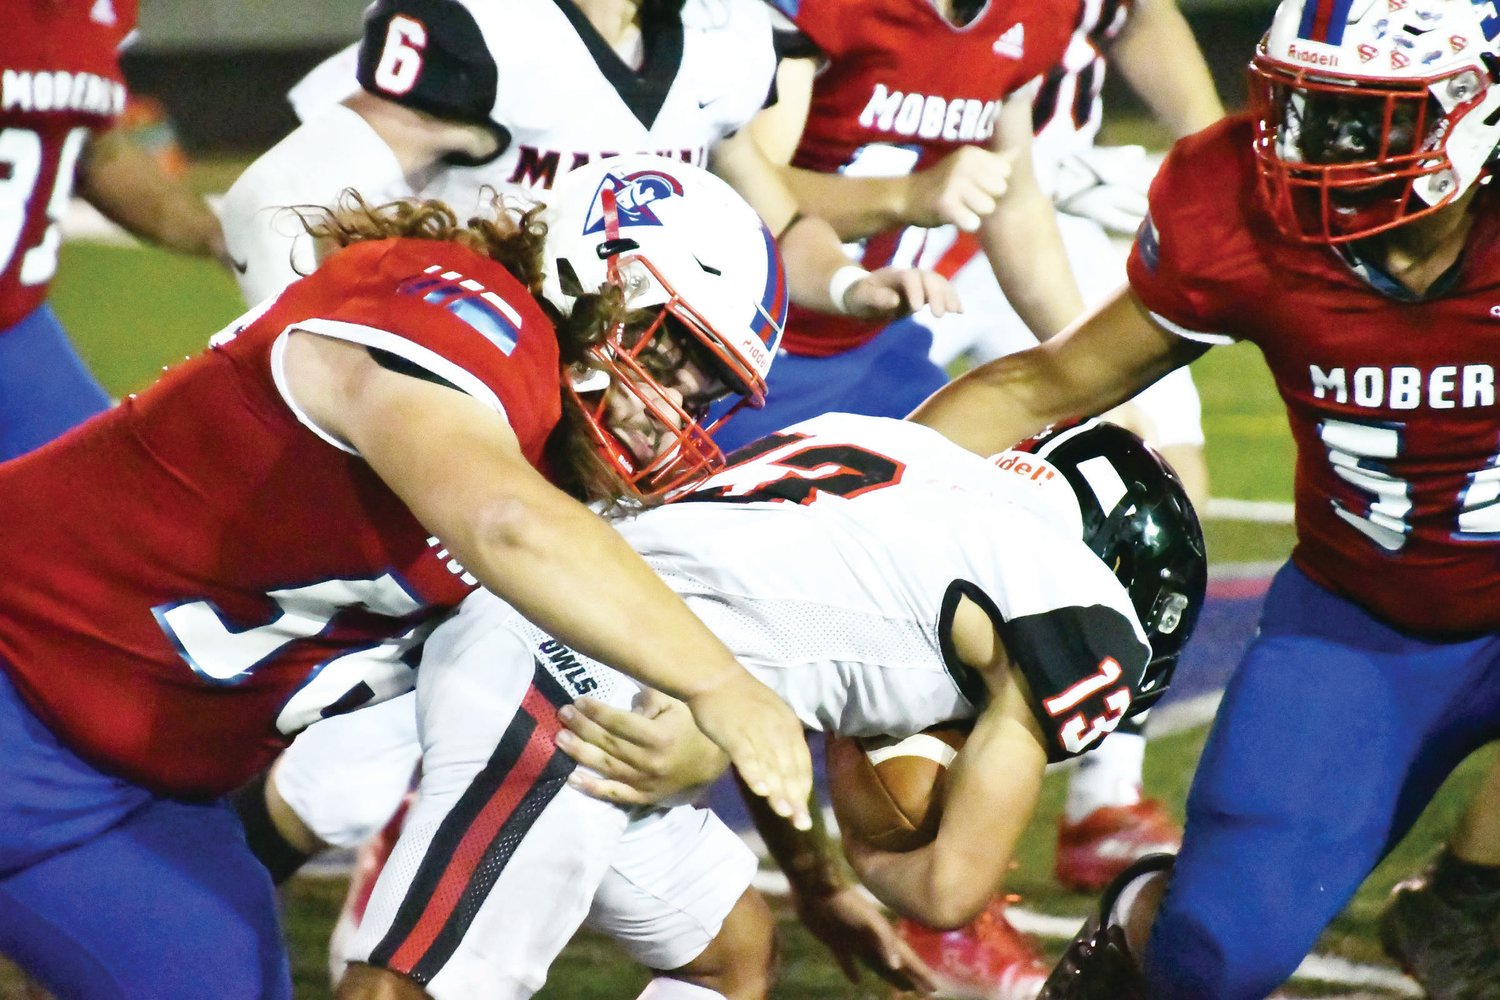 Moberly High School's Rick Huff (58) tackles Marshall running back Kamryn Workcuff during Friday night's North Central Missouri Conference football game at Dr. Larry K. Noel Spartan Stadium. Huff racked up 16 tackle points, including six solo stops; however, the Spartans suffered a 17-7 defeat at Homecoming.